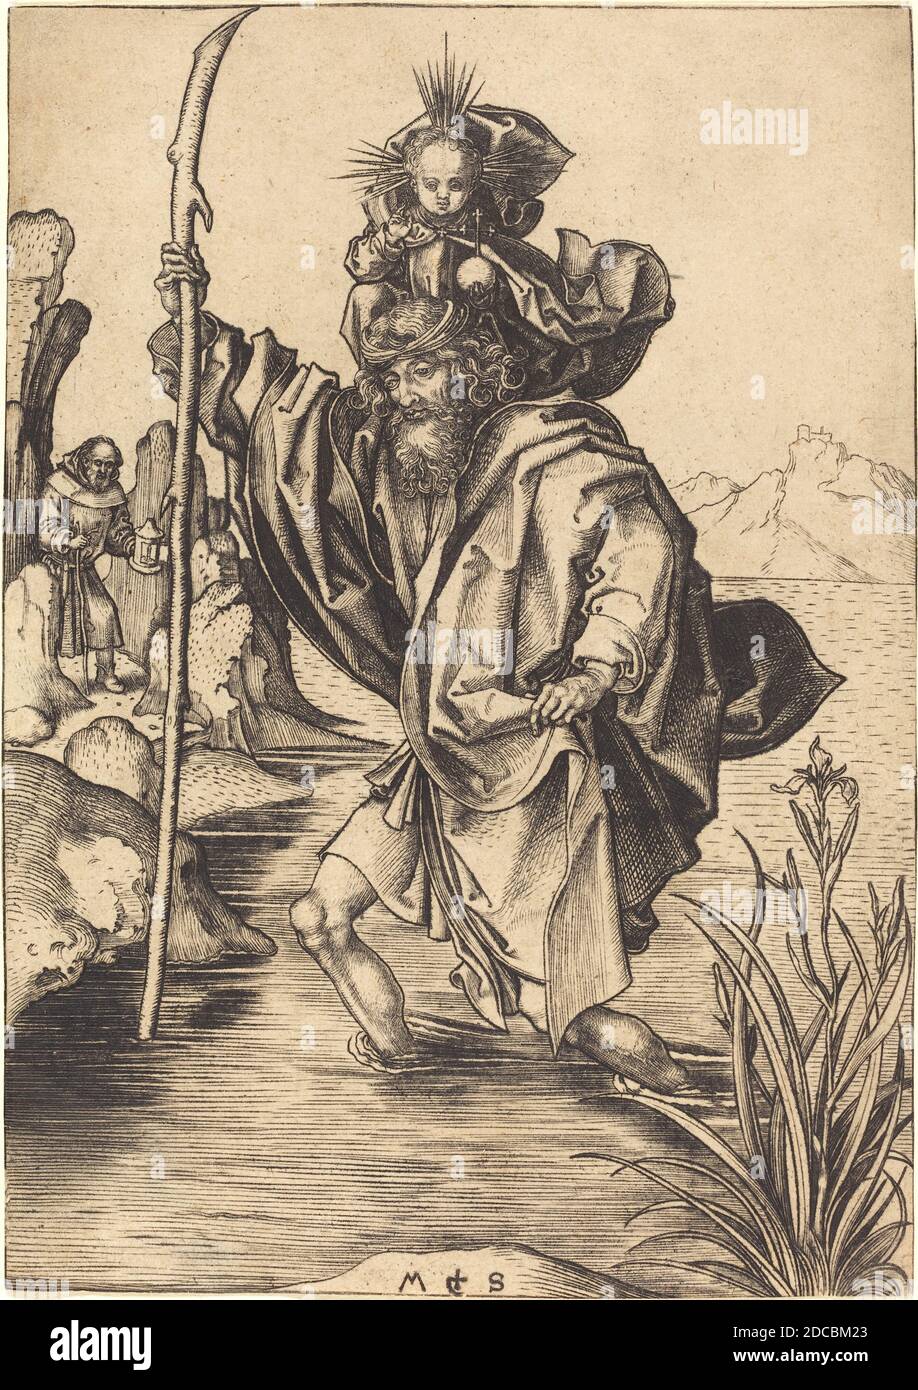 Martin Schongauer, (artist), German, c. 1450 - 1491, Saint Christopher, c. 1475/1480, engraving on laid paper, sheet (trimmed to plate mark): 15.9 x 11.3 cm (6 1/4 x 4 7/16 in Stock Photo